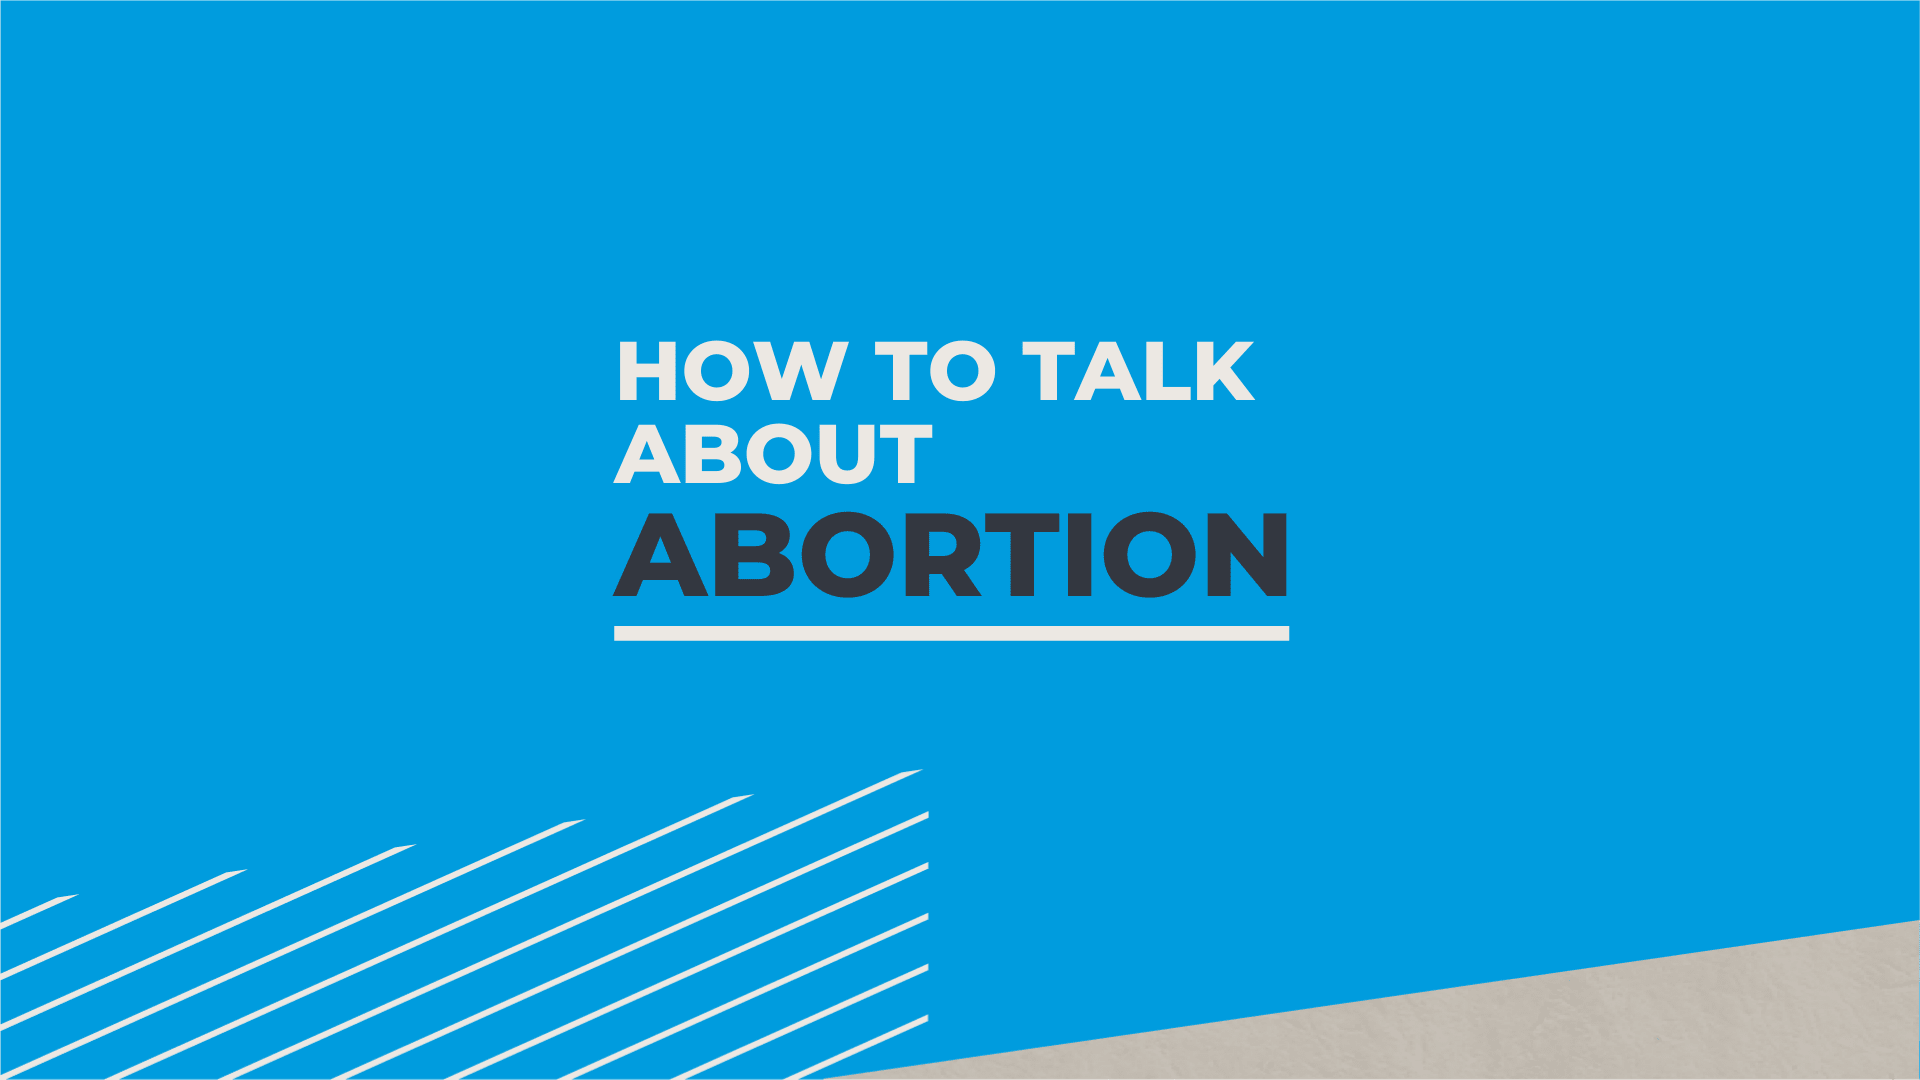 How to talk about abortion